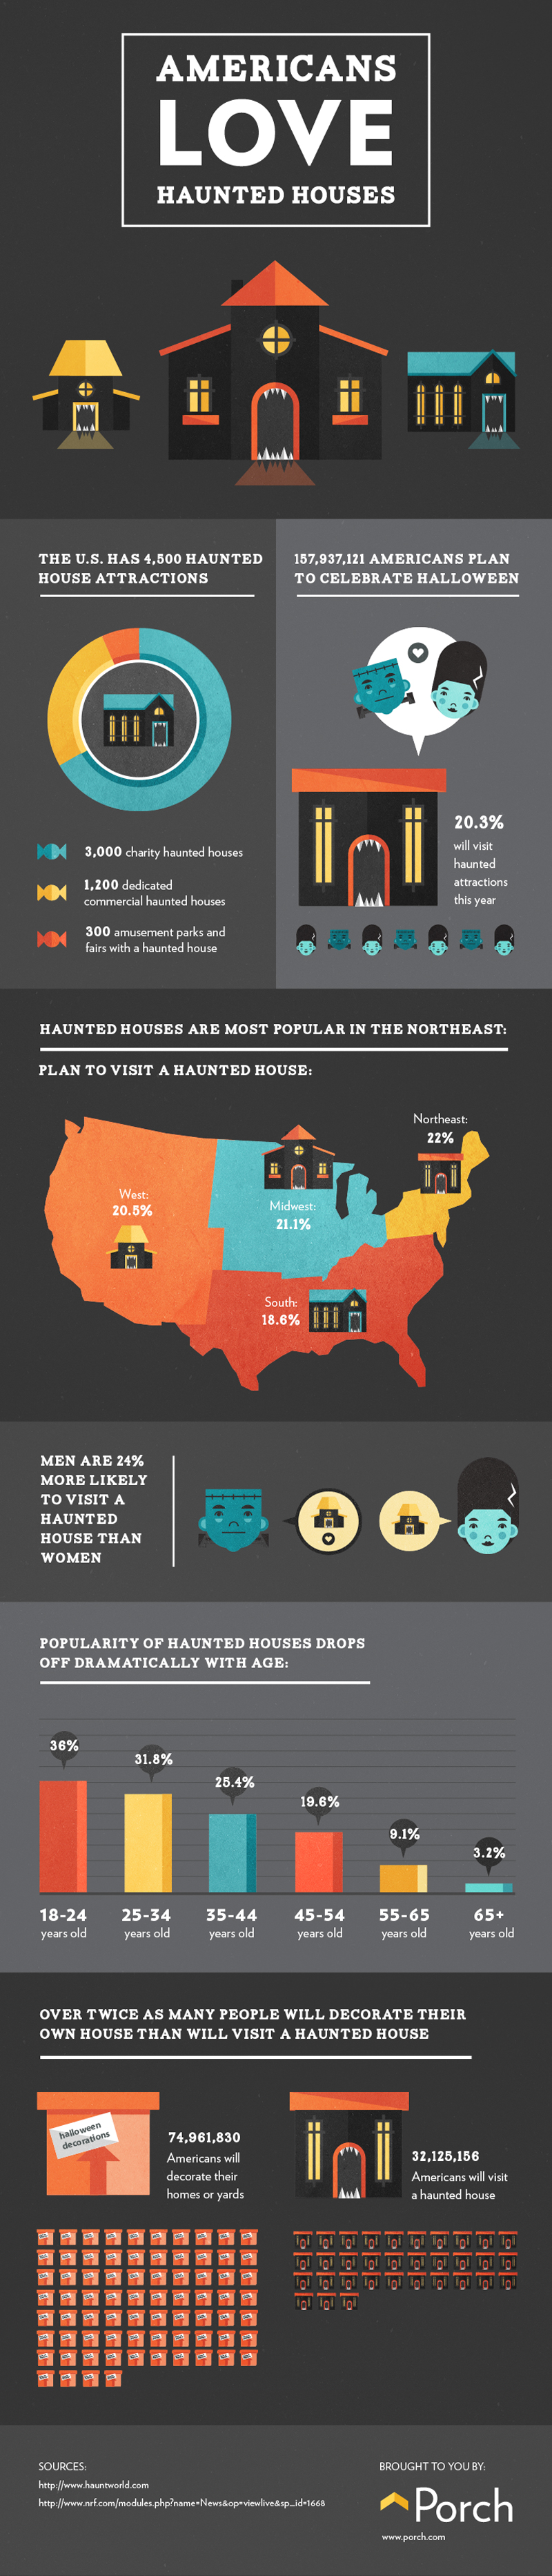 Americans Love Haunted Houses